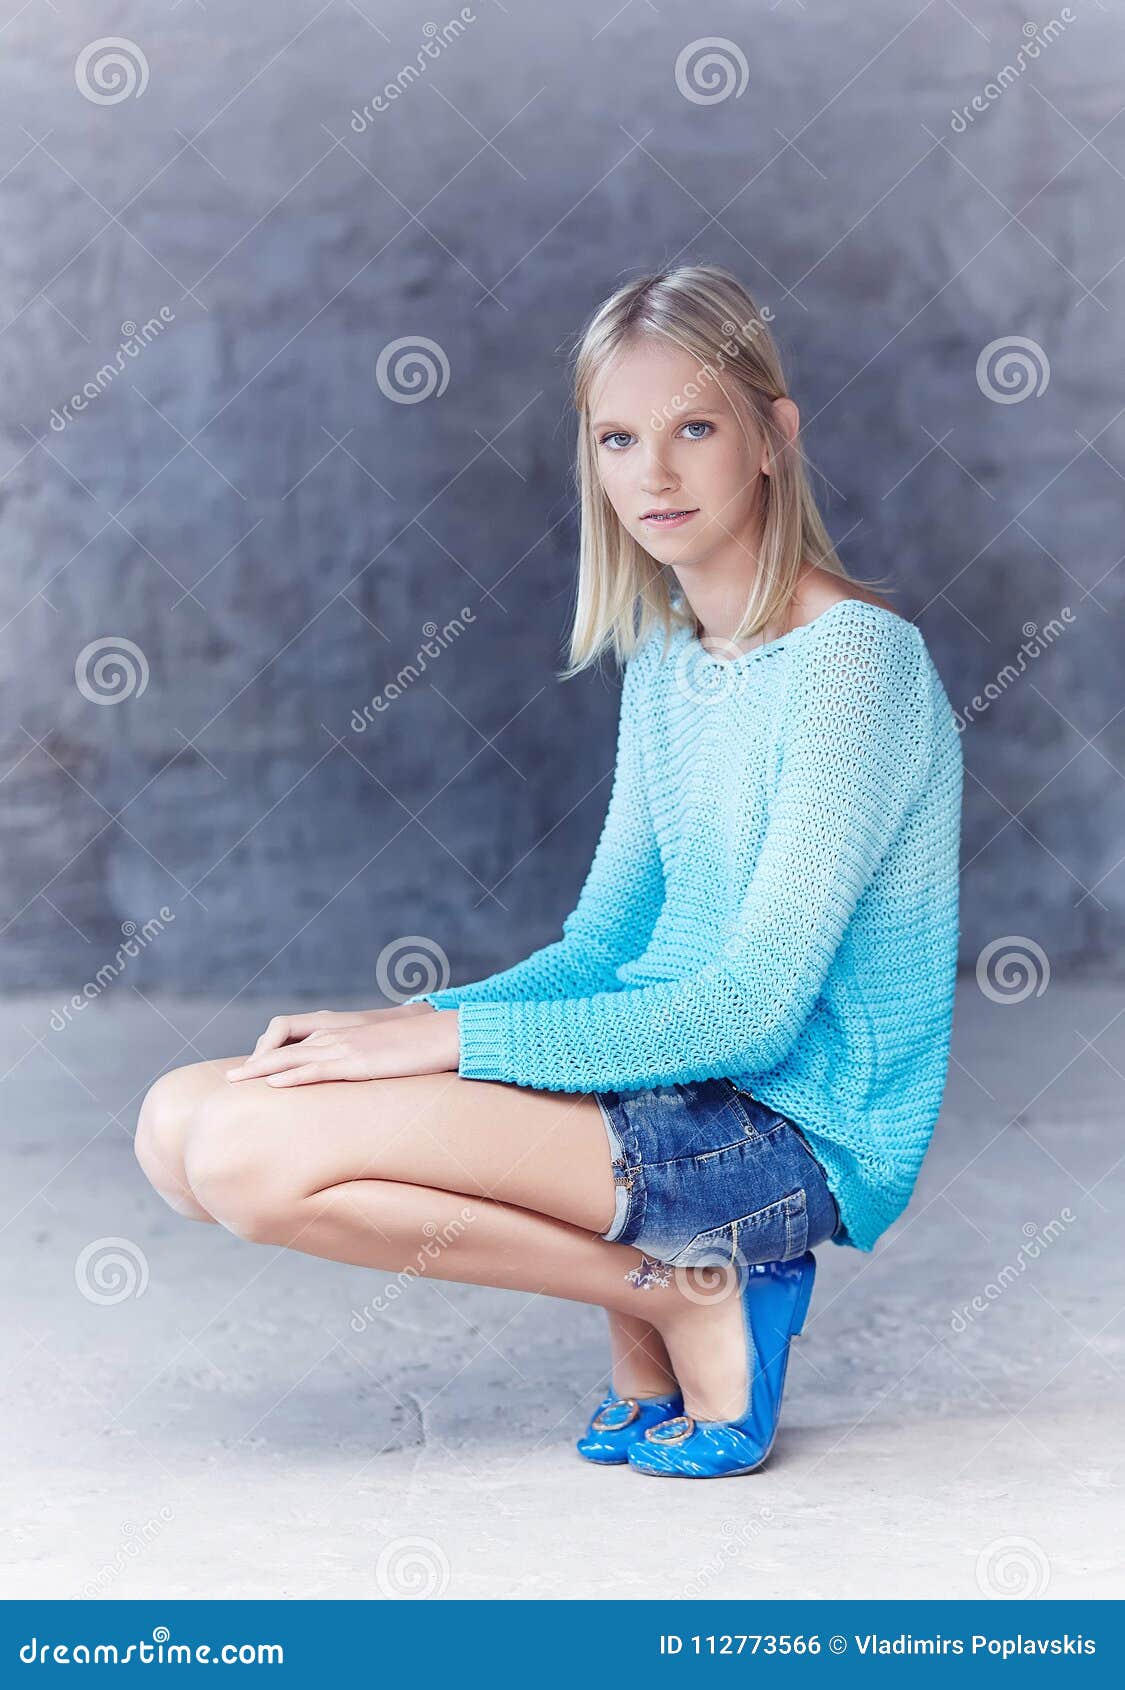 Slim Blond Girl in Azure Clothing. Stock Photo - Image of face ...